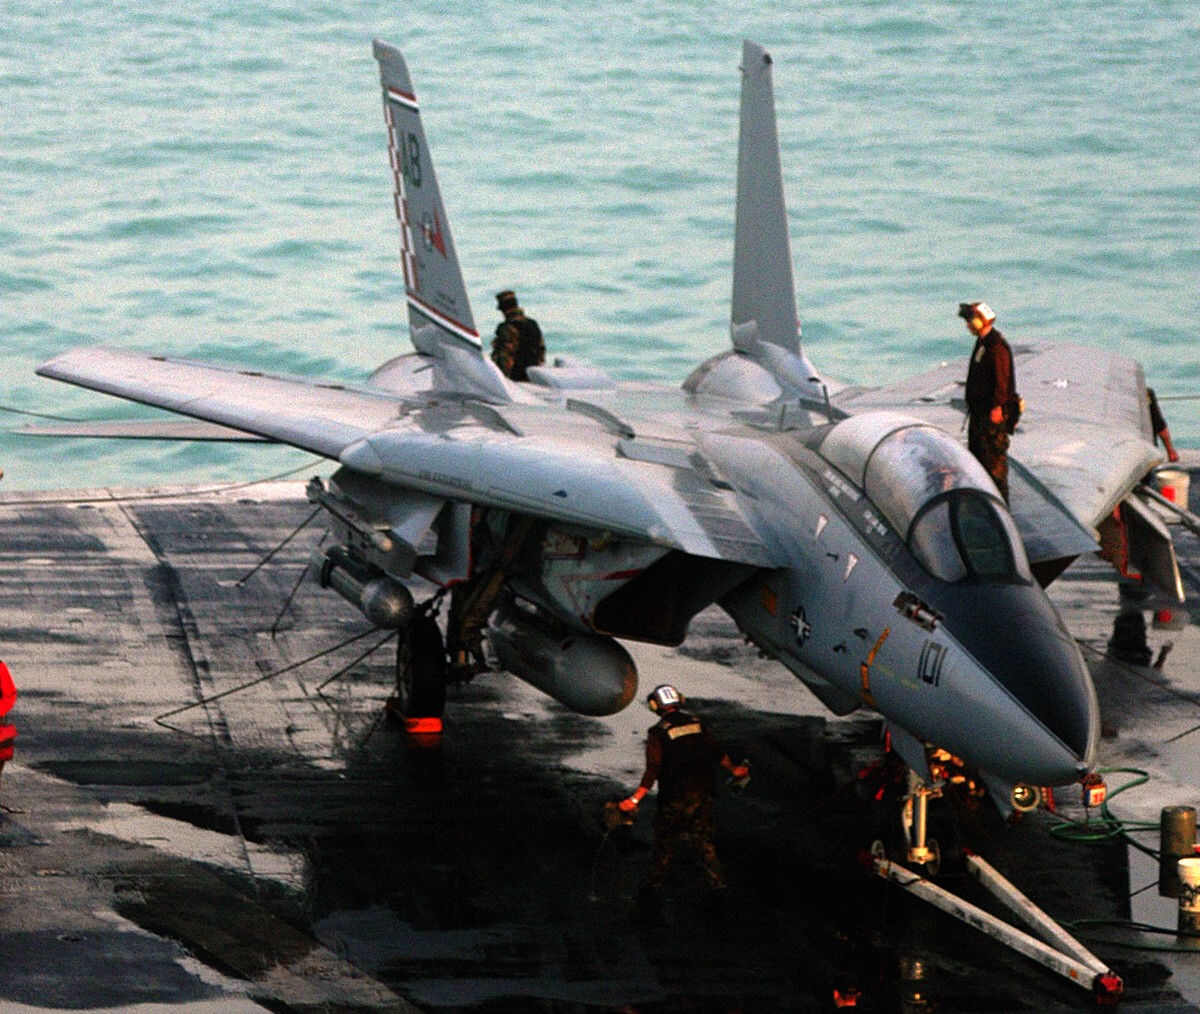 vf-211 fighting checkmates fighter squadron f-14a tomcat us navy carrier air wing cvw-1 uss enterprise cvn-65 54